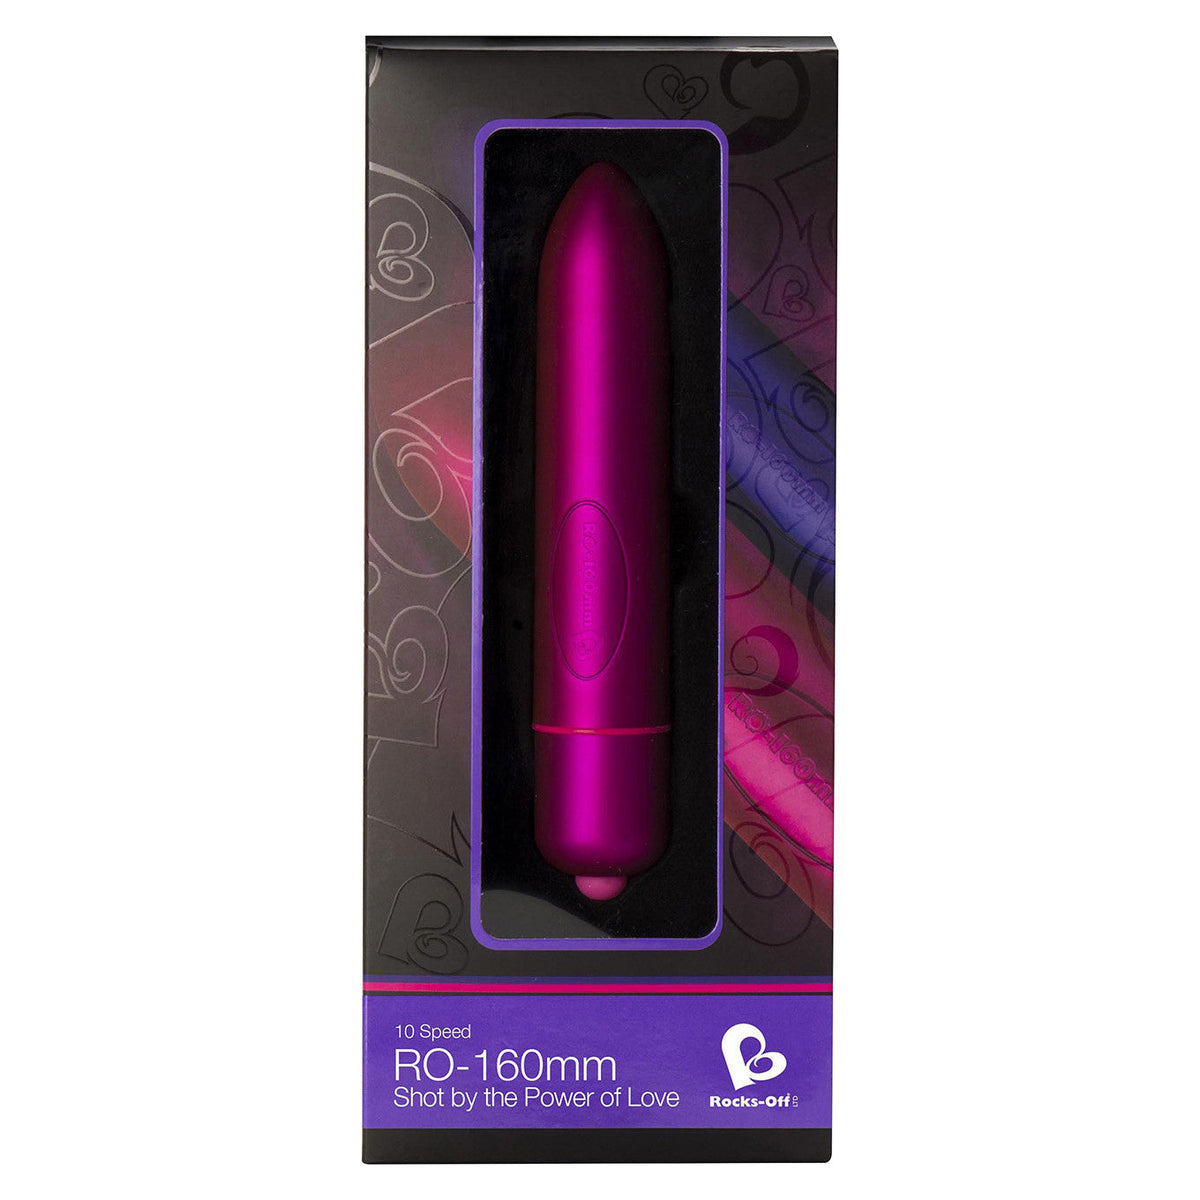 RockOff - 10 Speed RO-160mm Bullet Vibrator (Pink) -  Non Realistic Dildo w/o suction cup (Vibration) Non Rechargeable  Durio.sg